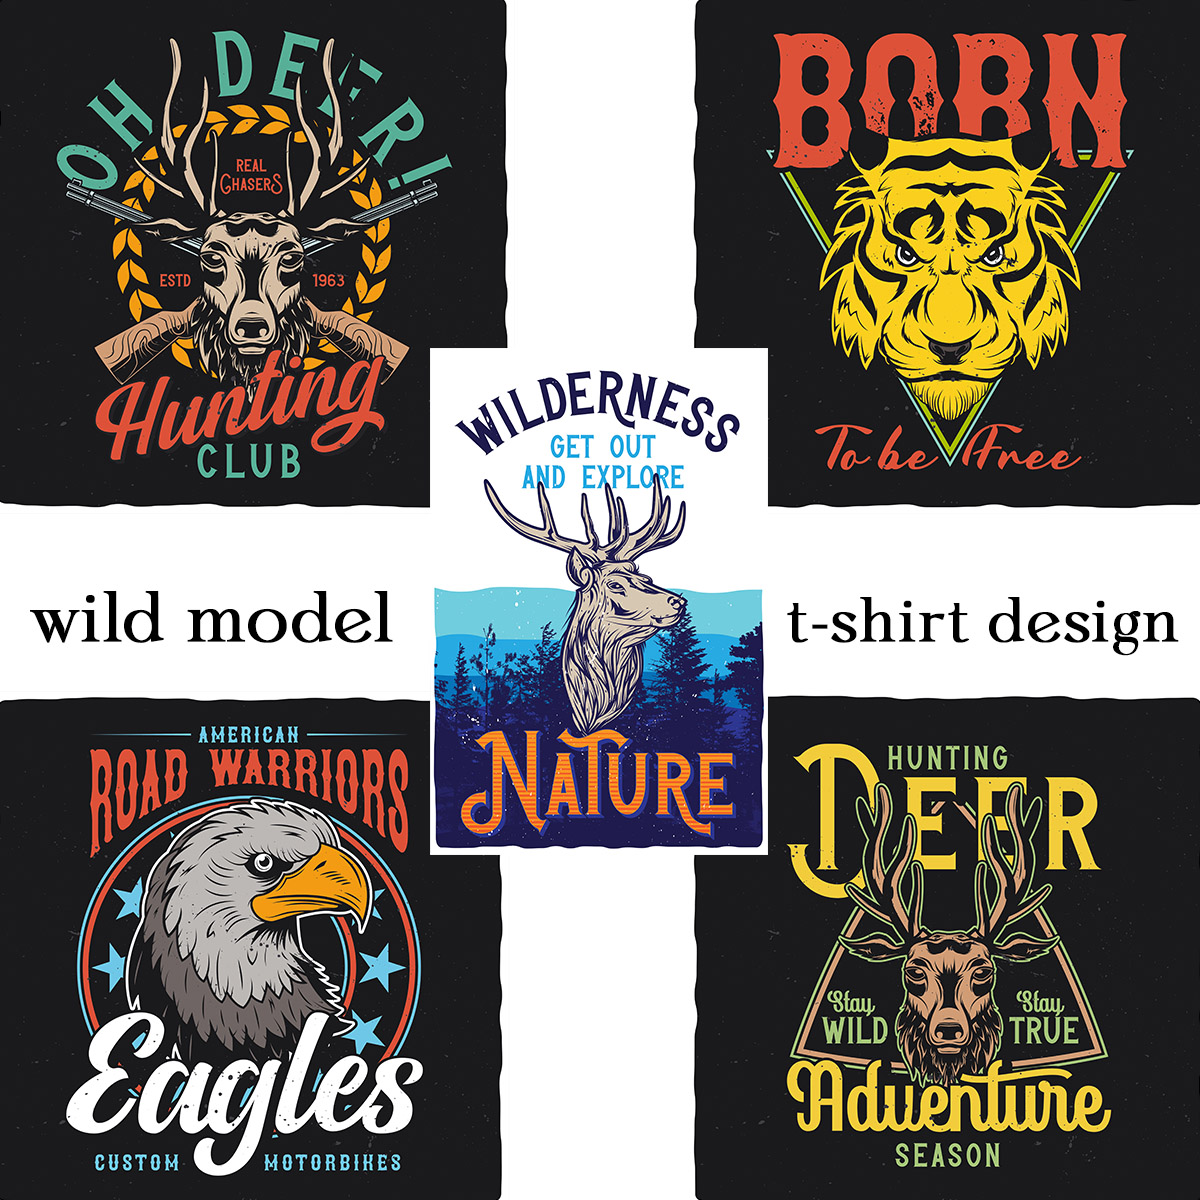 wild model t-shirt designs for printing purpose cover image.